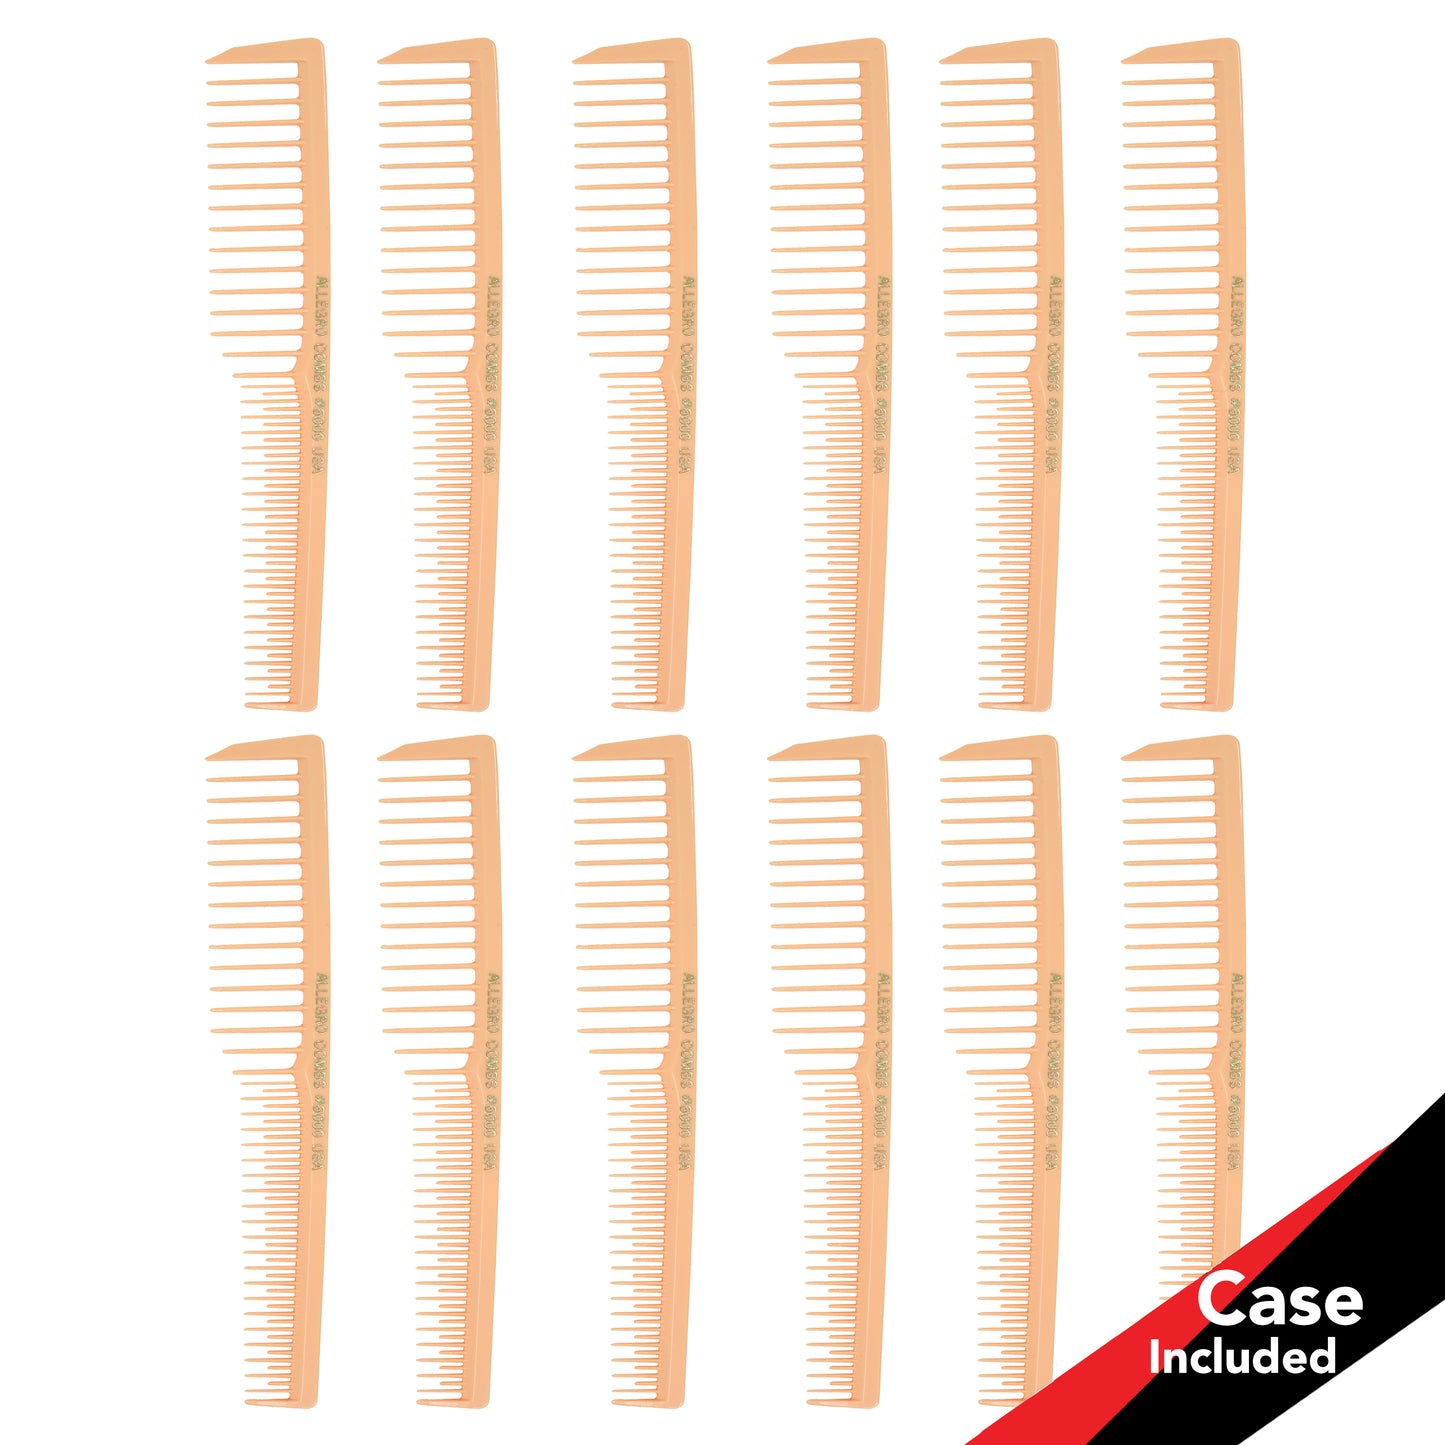 Allegro Combs 6000 Wide Tooth Teasing Lift Vented Hair Combs Space Tooth Barber Stylist Curly Hair Parting Fresh Colors12 Pc.